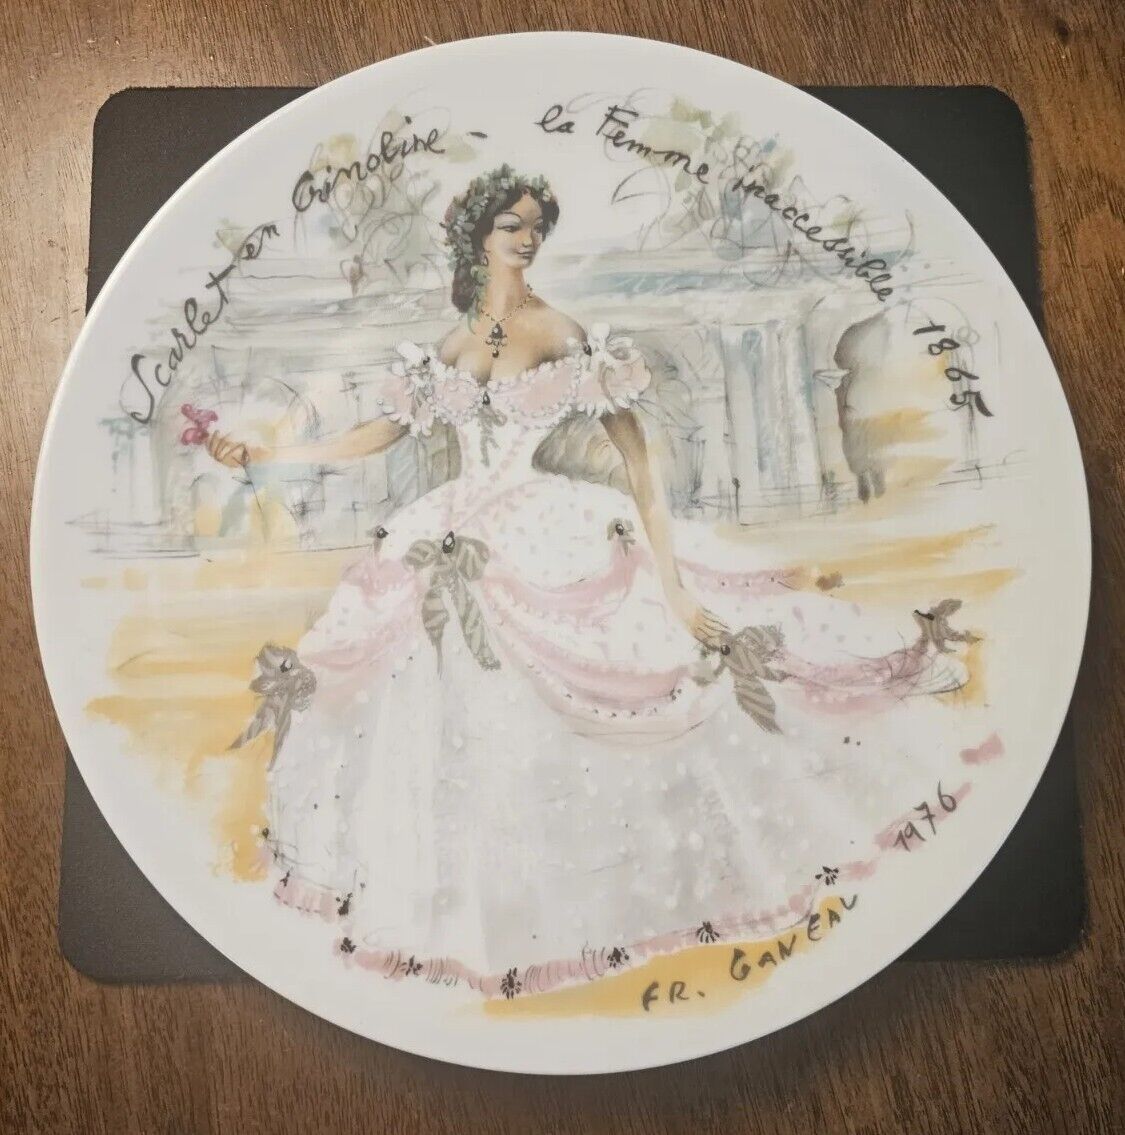 D'arceau-Limoges French Plate |Scarlet in Crinoline -The Inaccessible Woman 1865